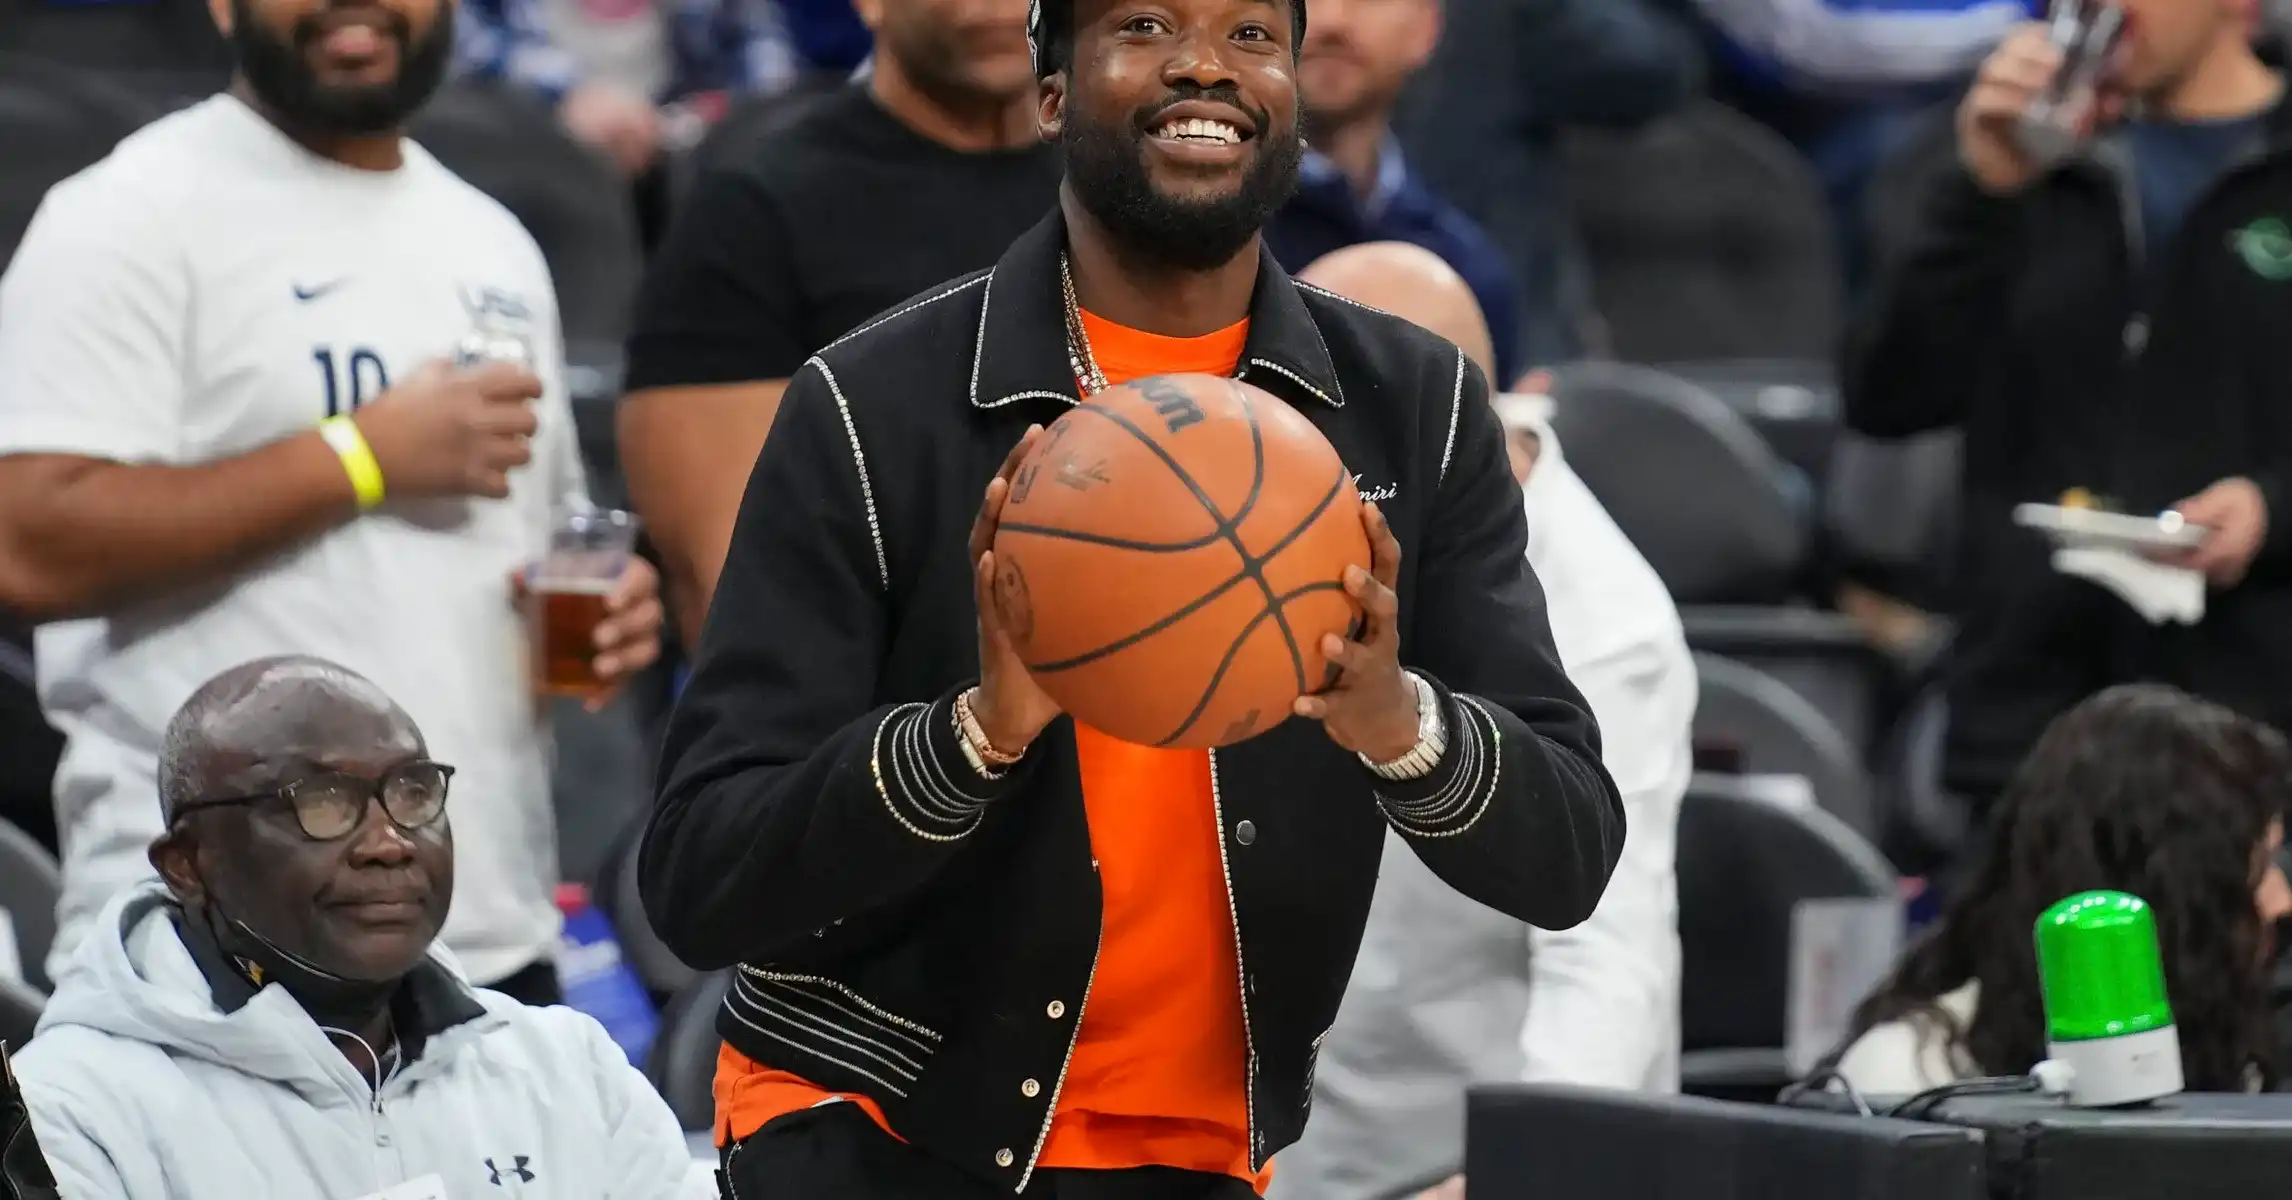 Meek Mill Defends Joel Embiid, Threatens to Attend Knicks Game After New York Fans Travel to Philadelphia